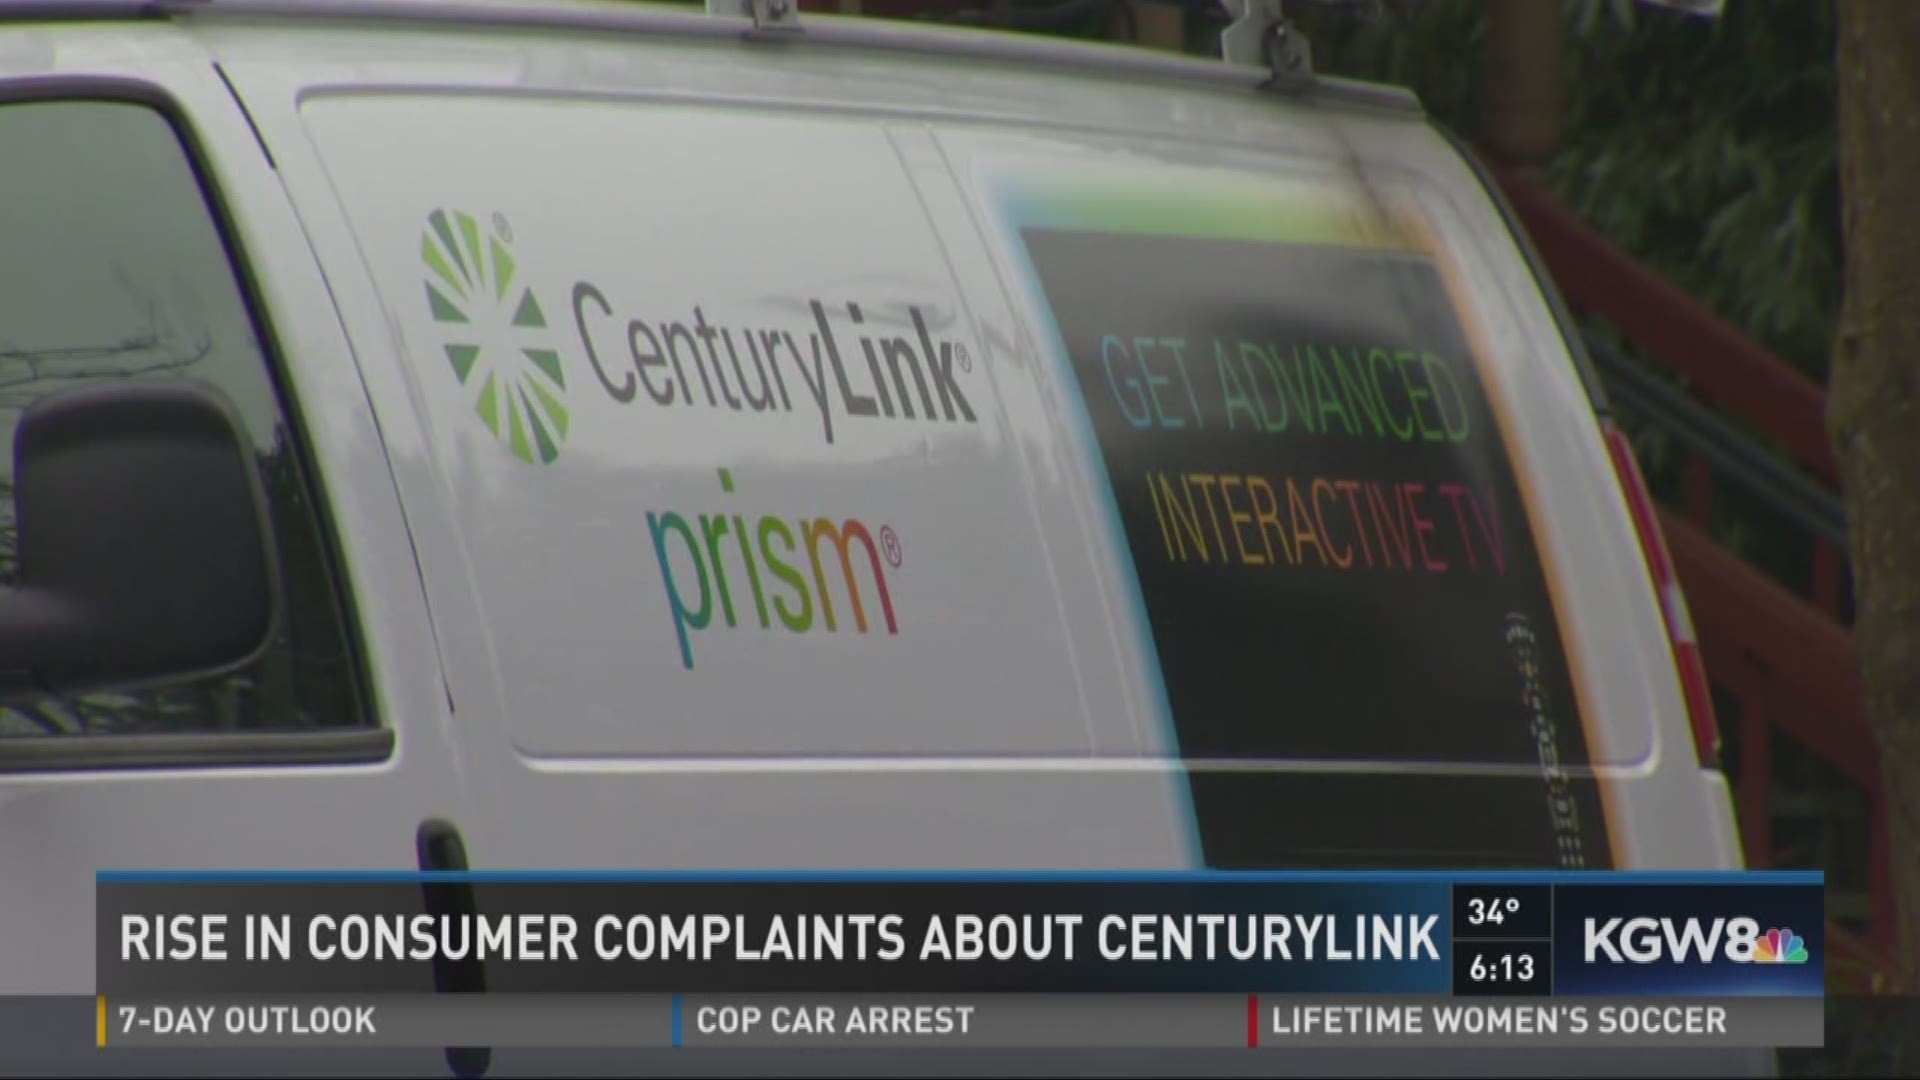 Rise in consumer complaints about CenturyLink